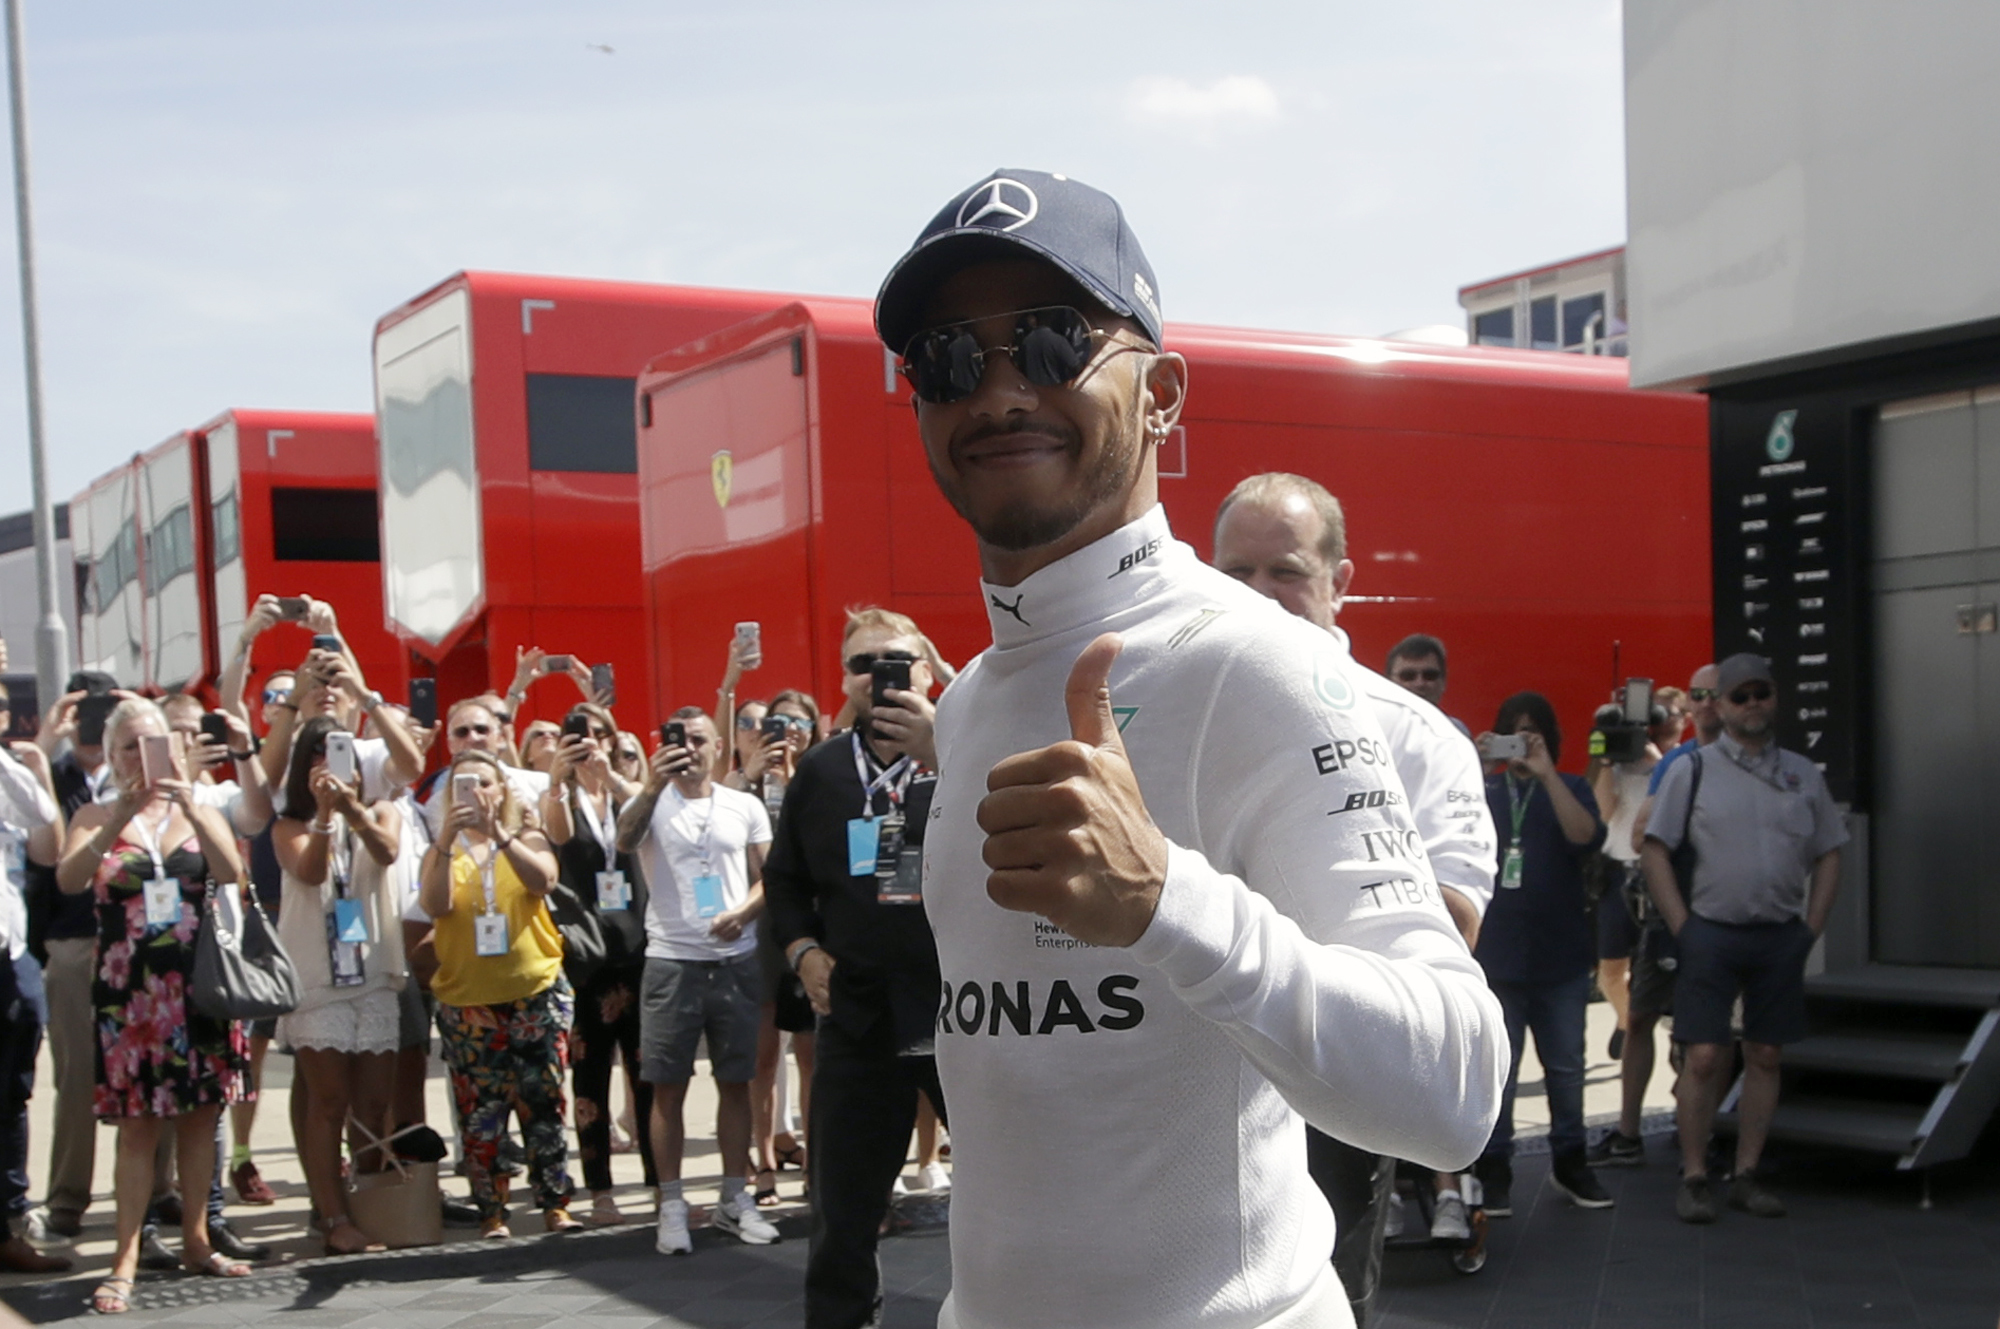 Mercedes driver Lewis Hamilton of Britain walks in the paddock before the third free practice at the Silverstone racetrack, Silverstone, England, Saturday, July 7, 2018. The British Formula One Grand Prix will be held on Sunday. (AP Photo/Luca Bruno)